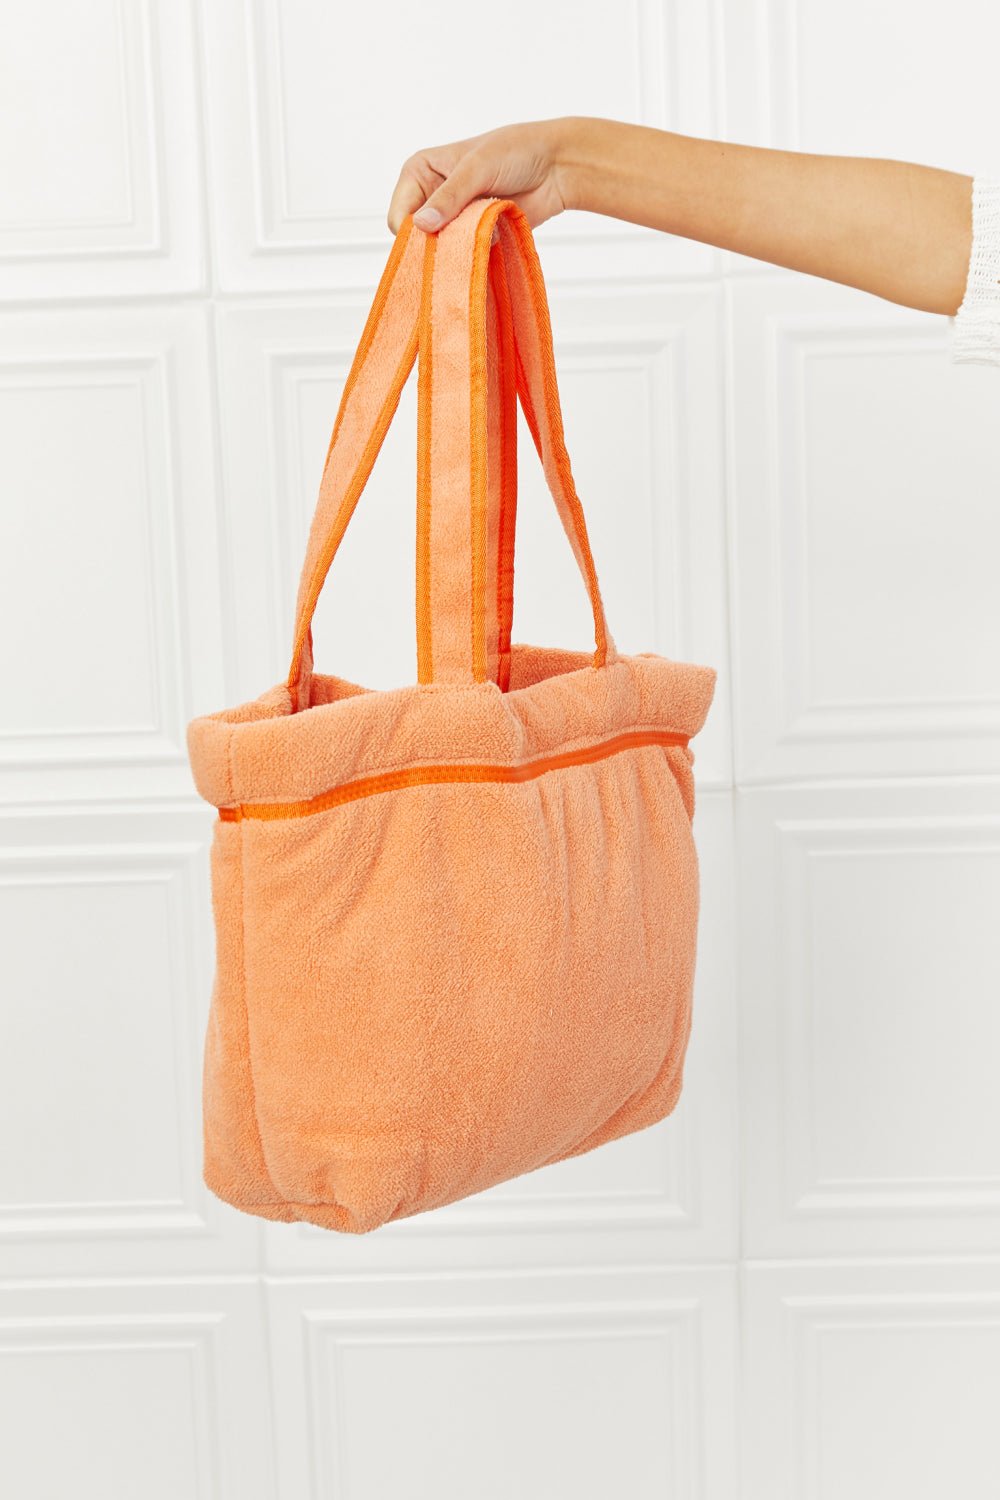 Terry Cloth Tote Bag in TangerineTote BagFame